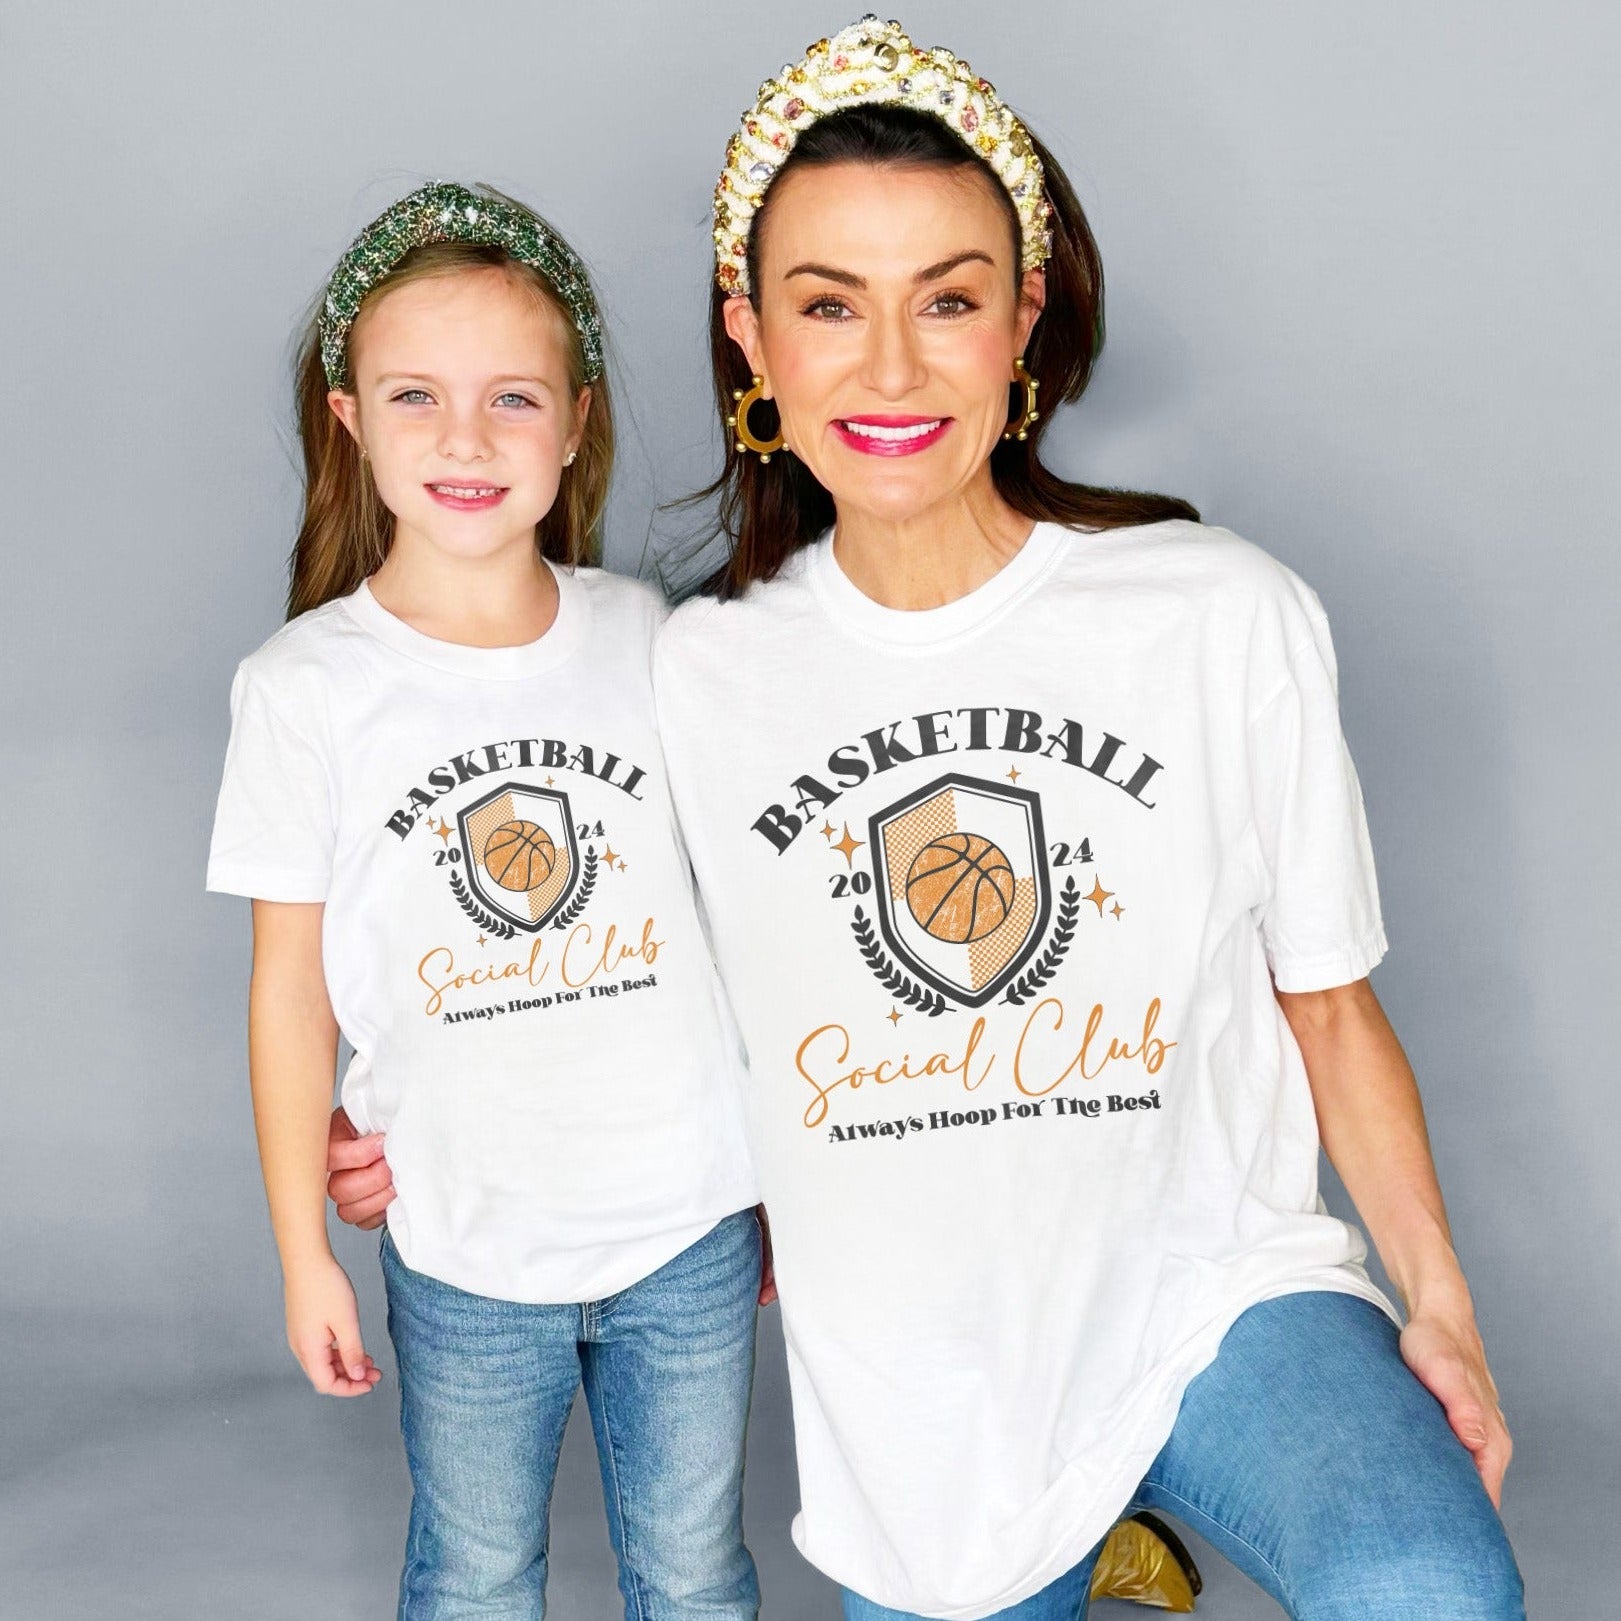 Basketball Social Club Youth and Adult Tee